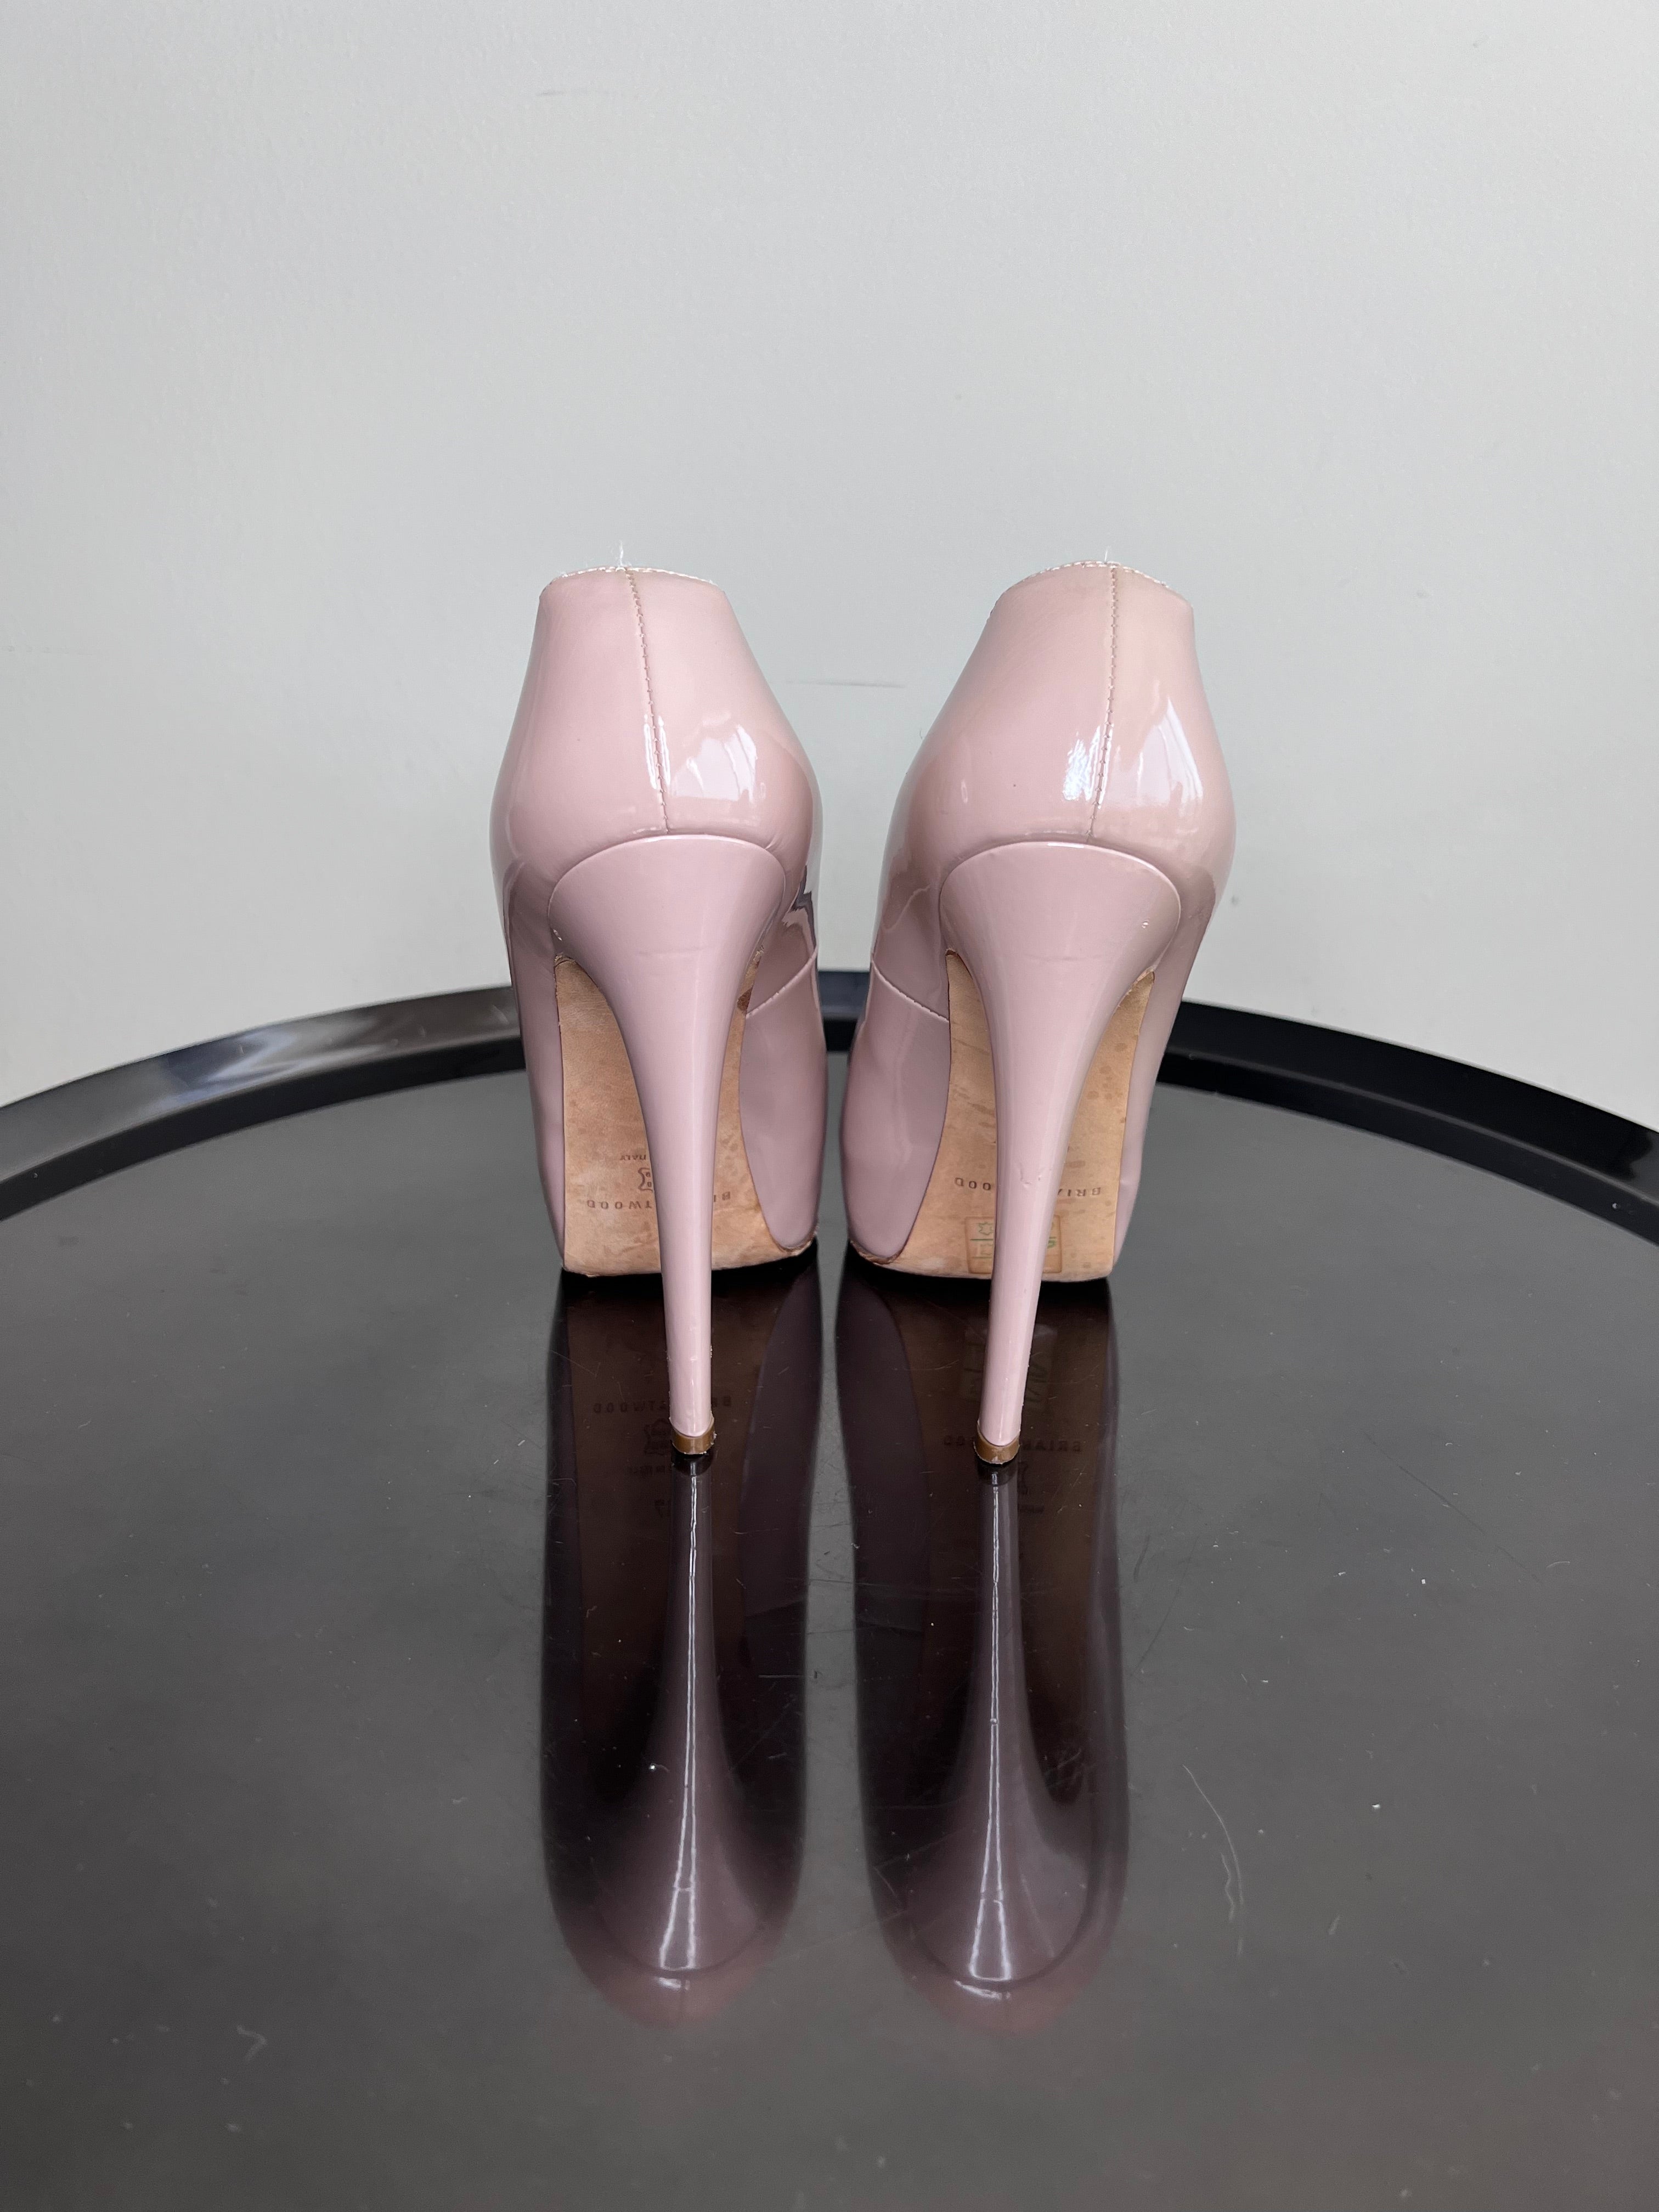 Cappuccino Nude Maniac 120 Pumps - BRIAN ATWOOD